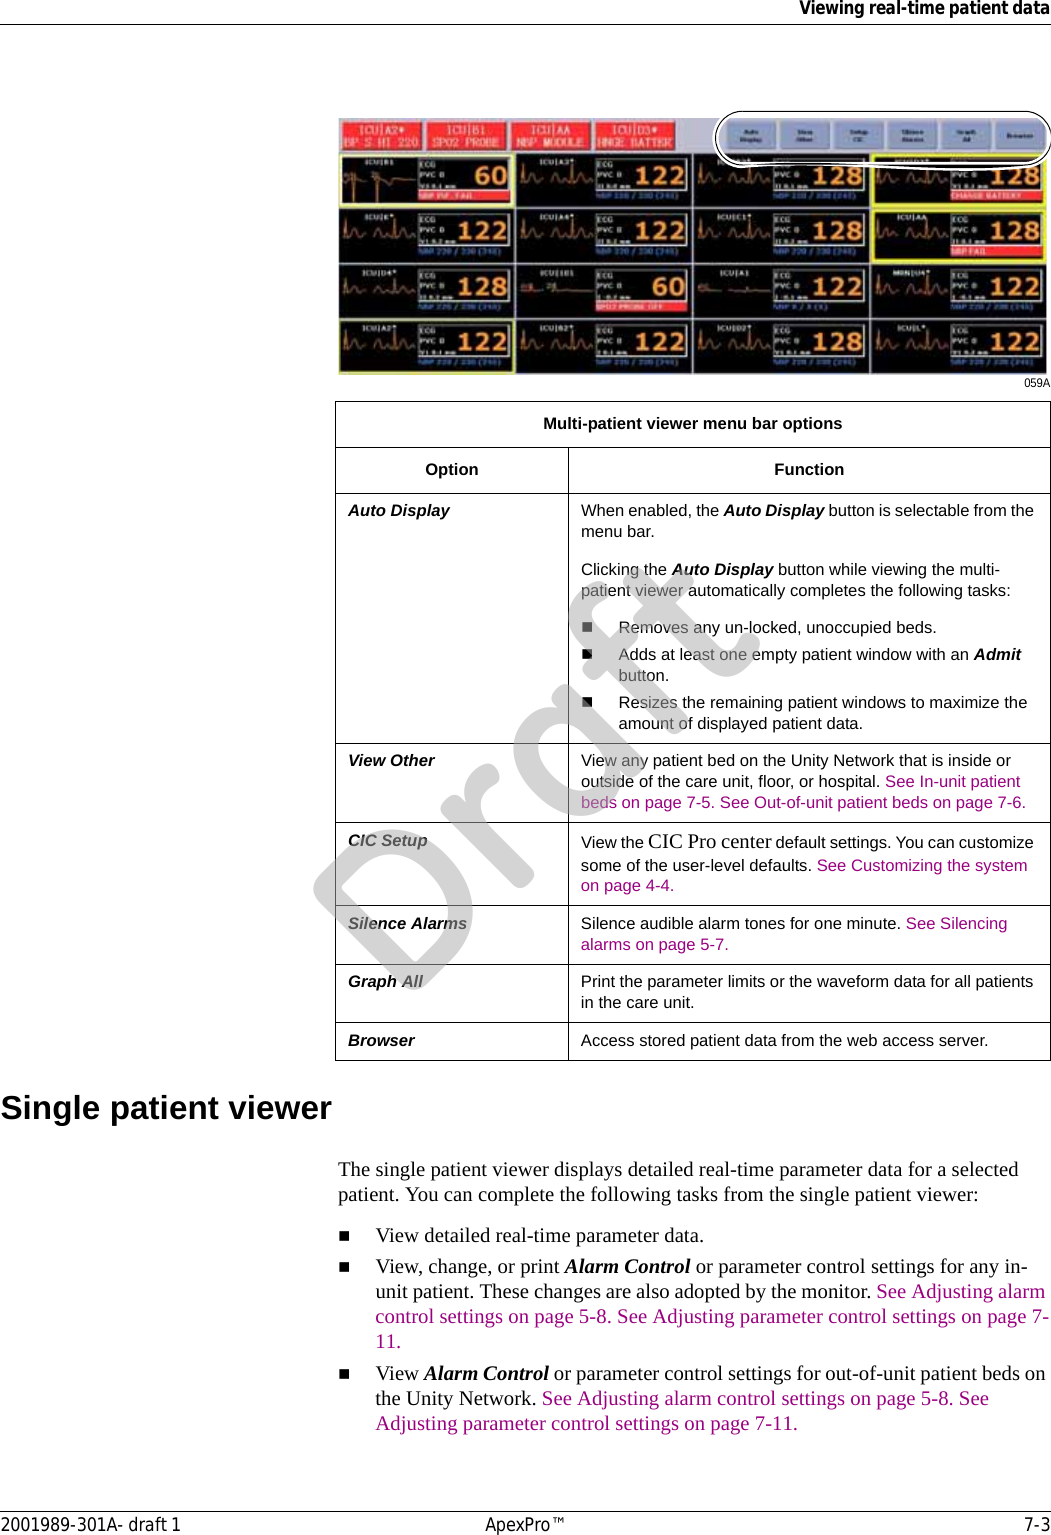 Viewing real-time patient data2001989-301A- draft 1 ApexPro™ 7-3059ASingle patient viewerThe single patient viewer displays detailed real-time parameter data for a selected patient. You can complete the following tasks from the single patient viewer:View detailed real-time parameter data.View, change, or print Alarm Control or parameter control settings for any in-unit patient. These changes are also adopted by the monitor. See Adjusting alarm control settings on page 5-8. See Adjusting parameter control settings on page 7-11.View Alarm Control or parameter control settings for out-of-unit patient beds on the Unity Network. See Adjusting alarm control settings on page 5-8. See Adjusting parameter control settings on page 7-11.Multi-patient viewer menu bar optionsOption FunctionAuto Display When enabled, the Auto Display button is selectable from the menu bar. Clicking the Auto Display button while viewing the multi-patient viewer automatically completes the following tasks:Removes any un-locked, unoccupied beds.Adds at least one empty patient window with an Admit button.Resizes the remaining patient windows to maximize the amount of displayed patient data.View Other View any patient bed on the Unity Network that is inside or outside of the care unit, floor, or hospital. See In-unit patient beds on page 7-5. See Out-of-unit patient beds on page 7-6.CIC Setup View the CIC Pro center default settings. You can customize some of the user-level defaults. See Customizing the system on page 4-4.Silence Alarms Silence audible alarm tones for one minute. See Silencing alarms on page 5-7.Graph All Print the parameter limits or the waveform data for all patients in the care unit.Browser Access stored patient data from the web access server.Draft